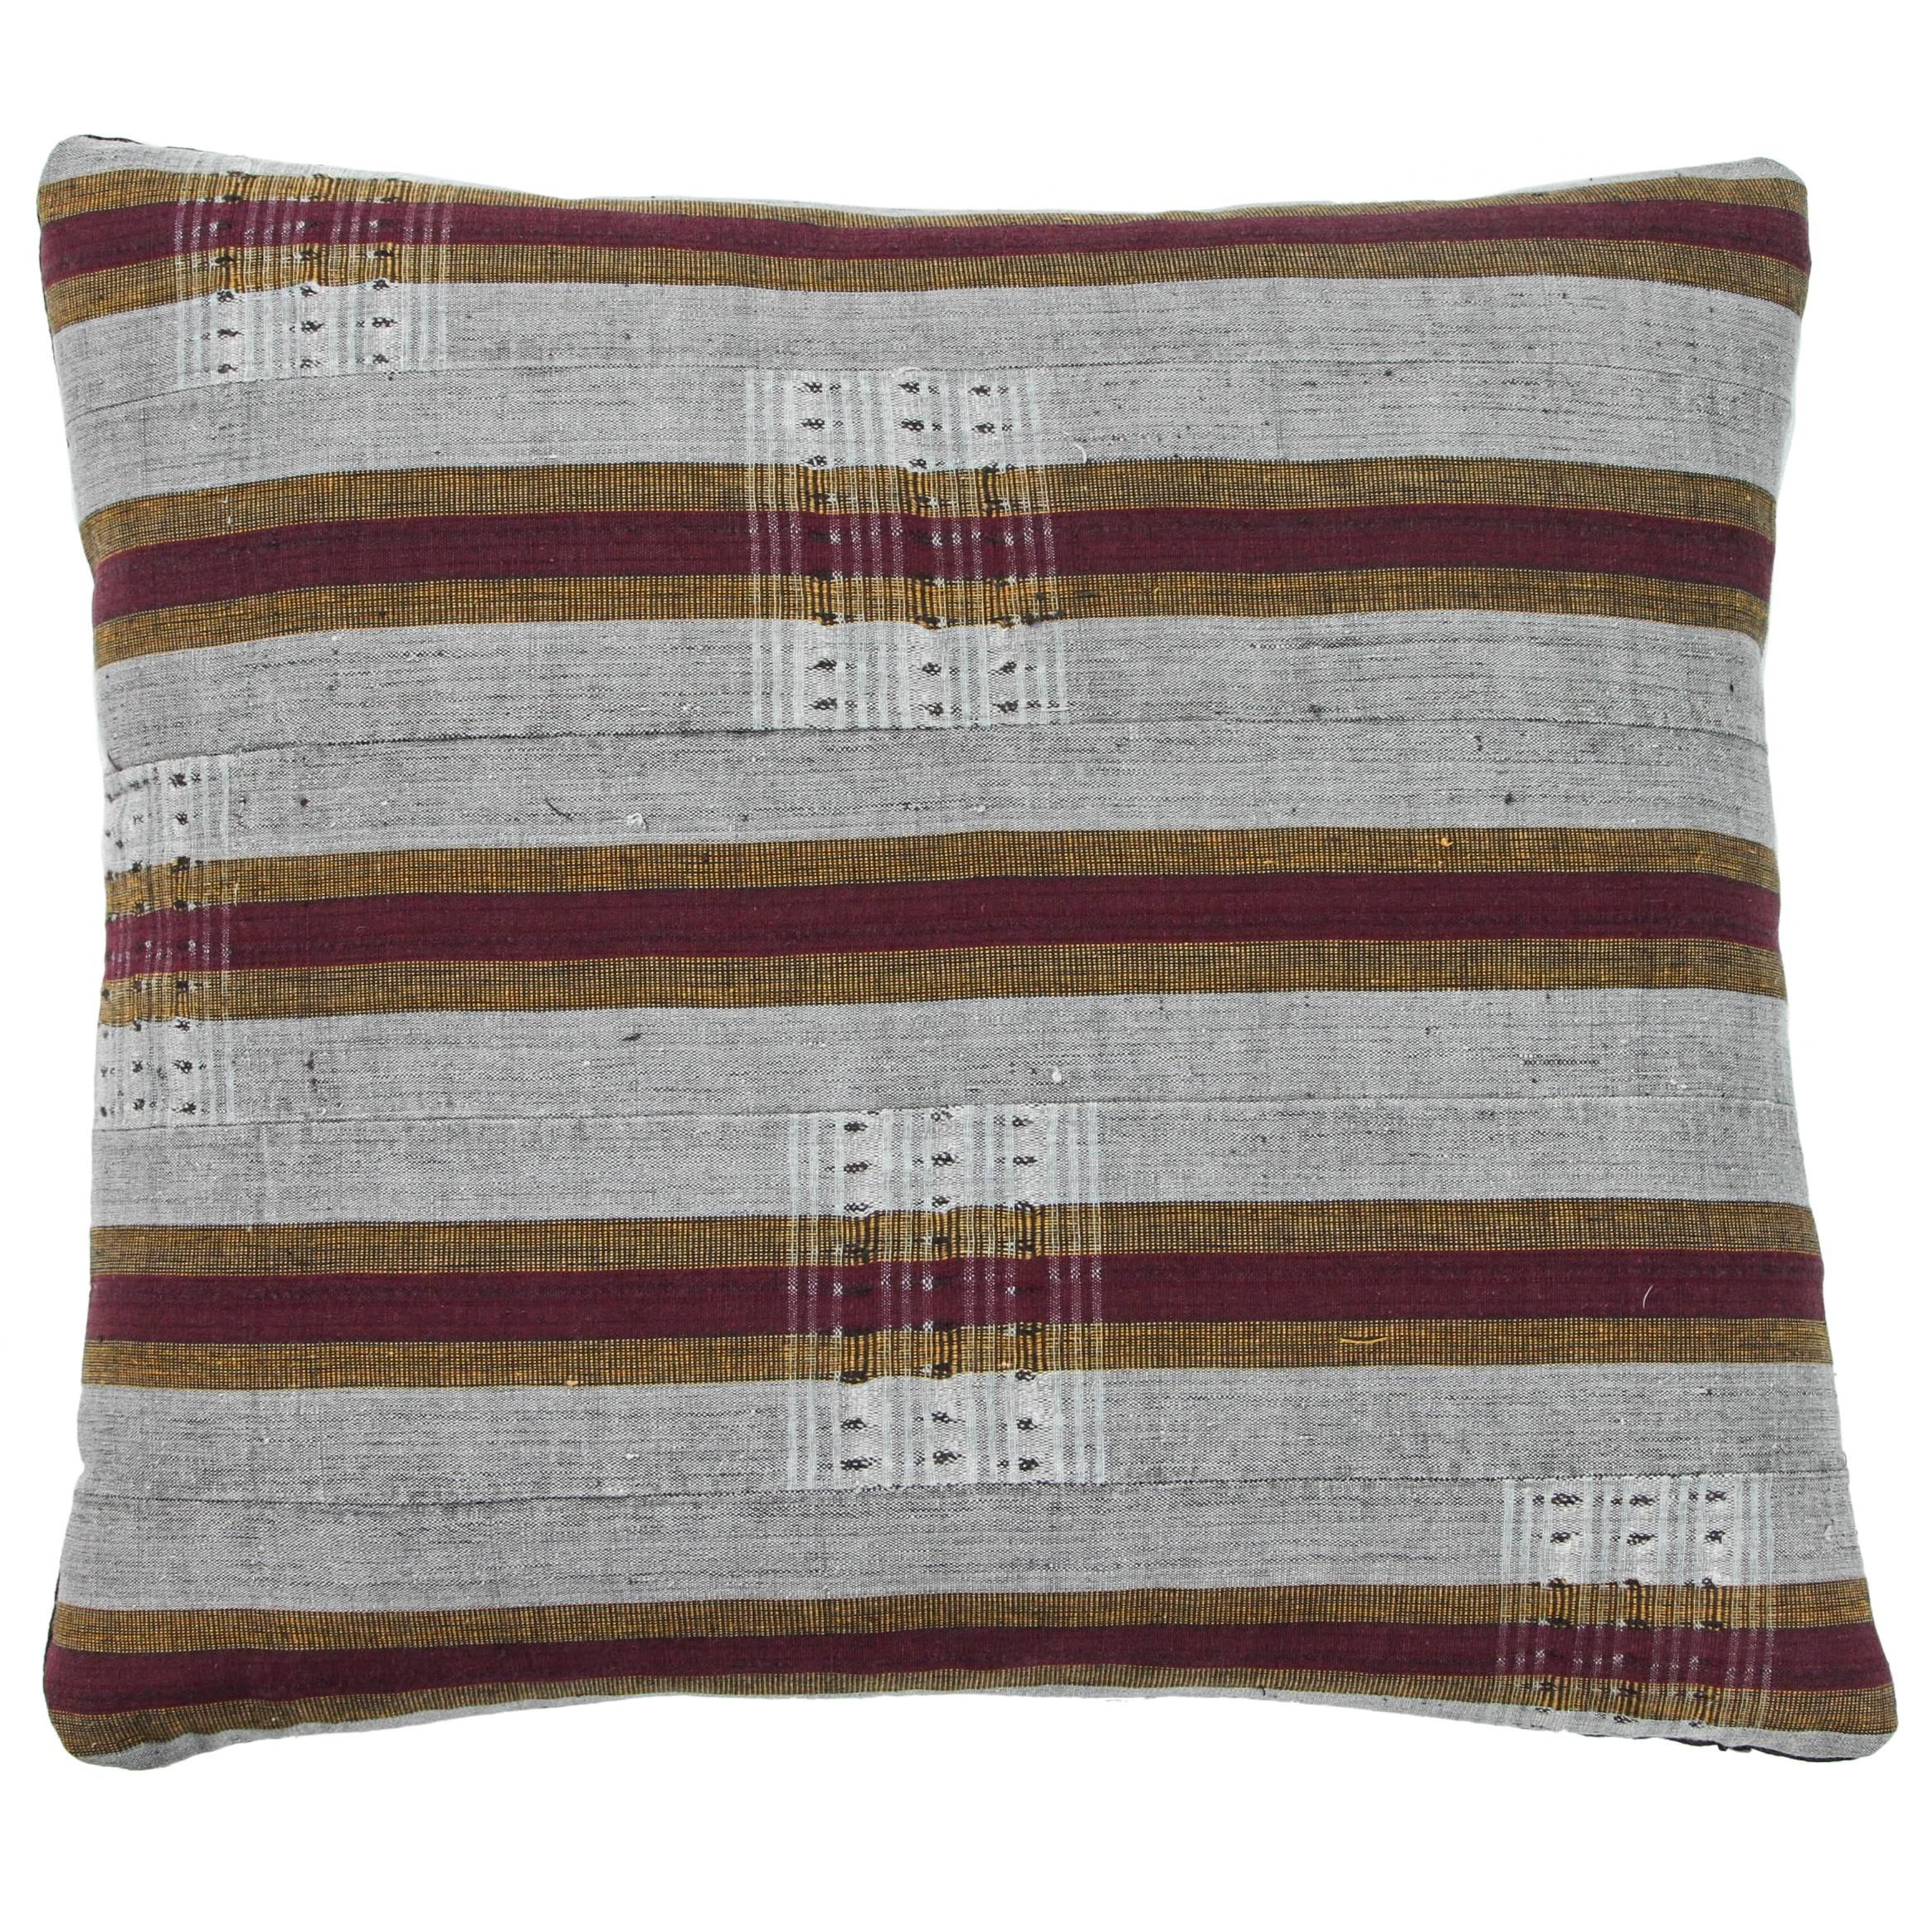 Ashante African Pillow, Burgundy Red, Gray and Gold For Sale